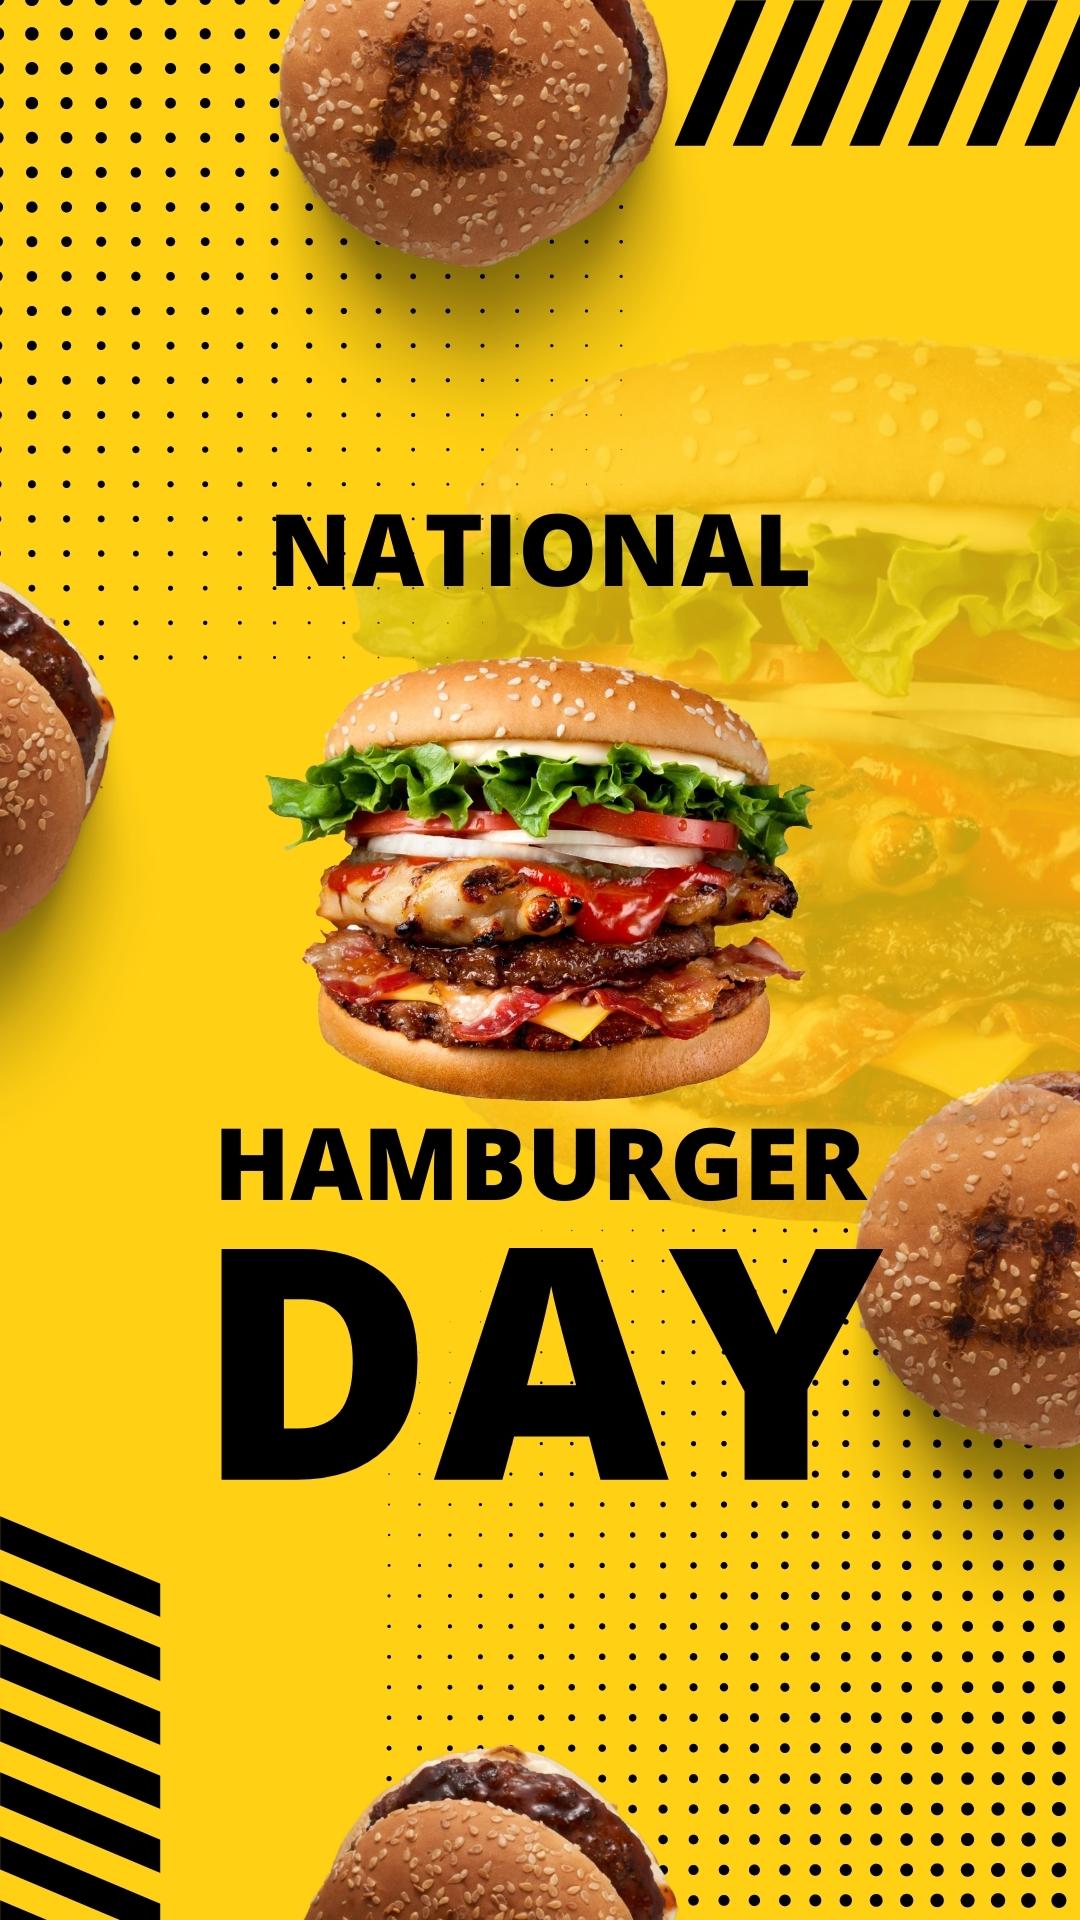 best national hamburger day wishes images for instagram post (41)